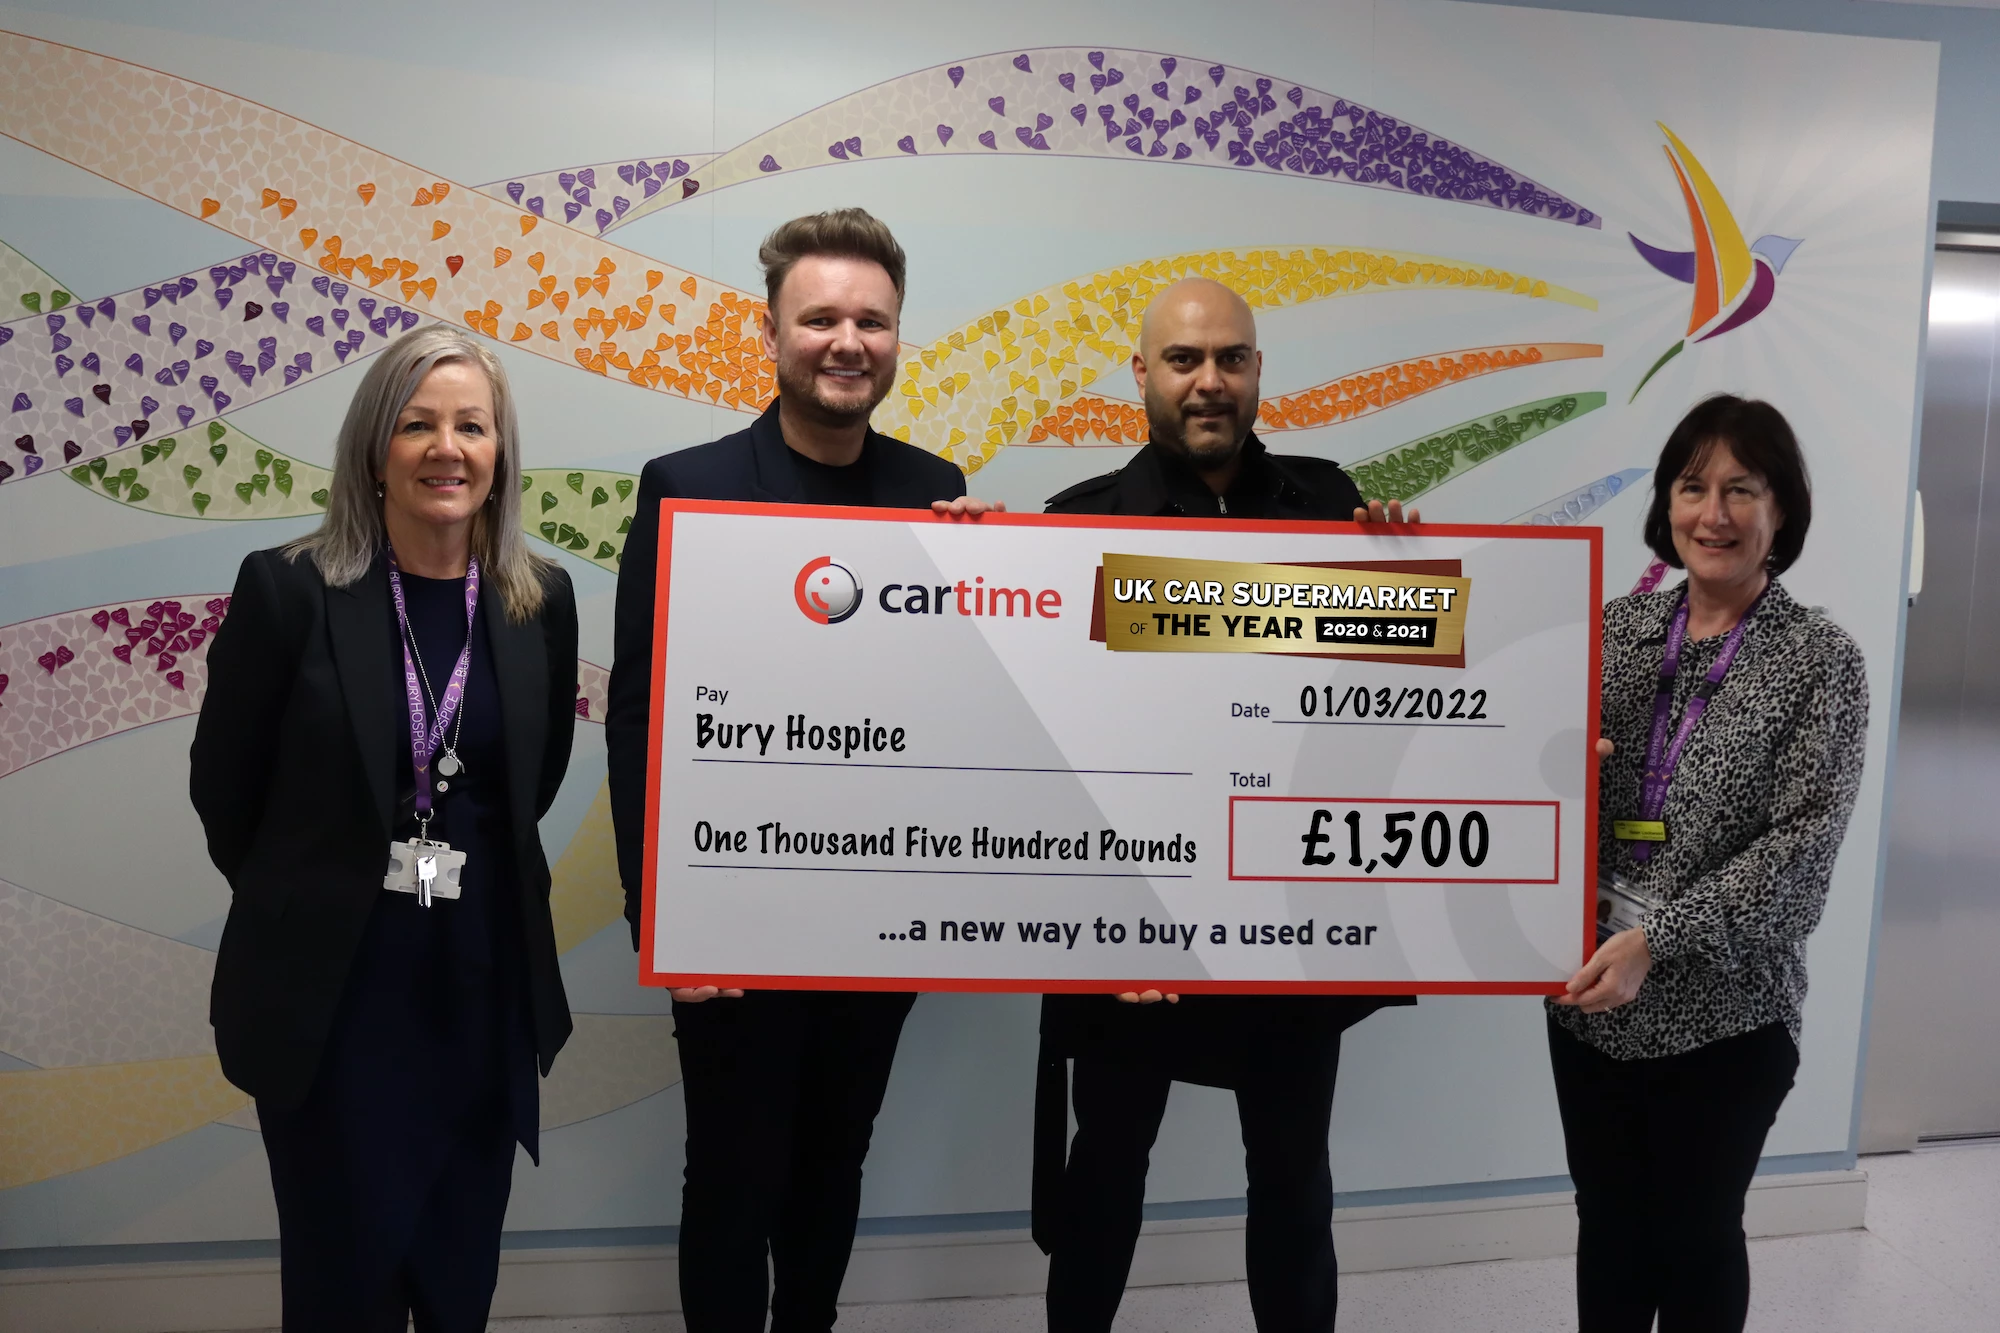 Alison Holland, Head of Fundraising and Helen Lockwood, CEO from Bury Hospice, with Matt Kay from Cartime and Nawasad Irshad from Enterprise. 